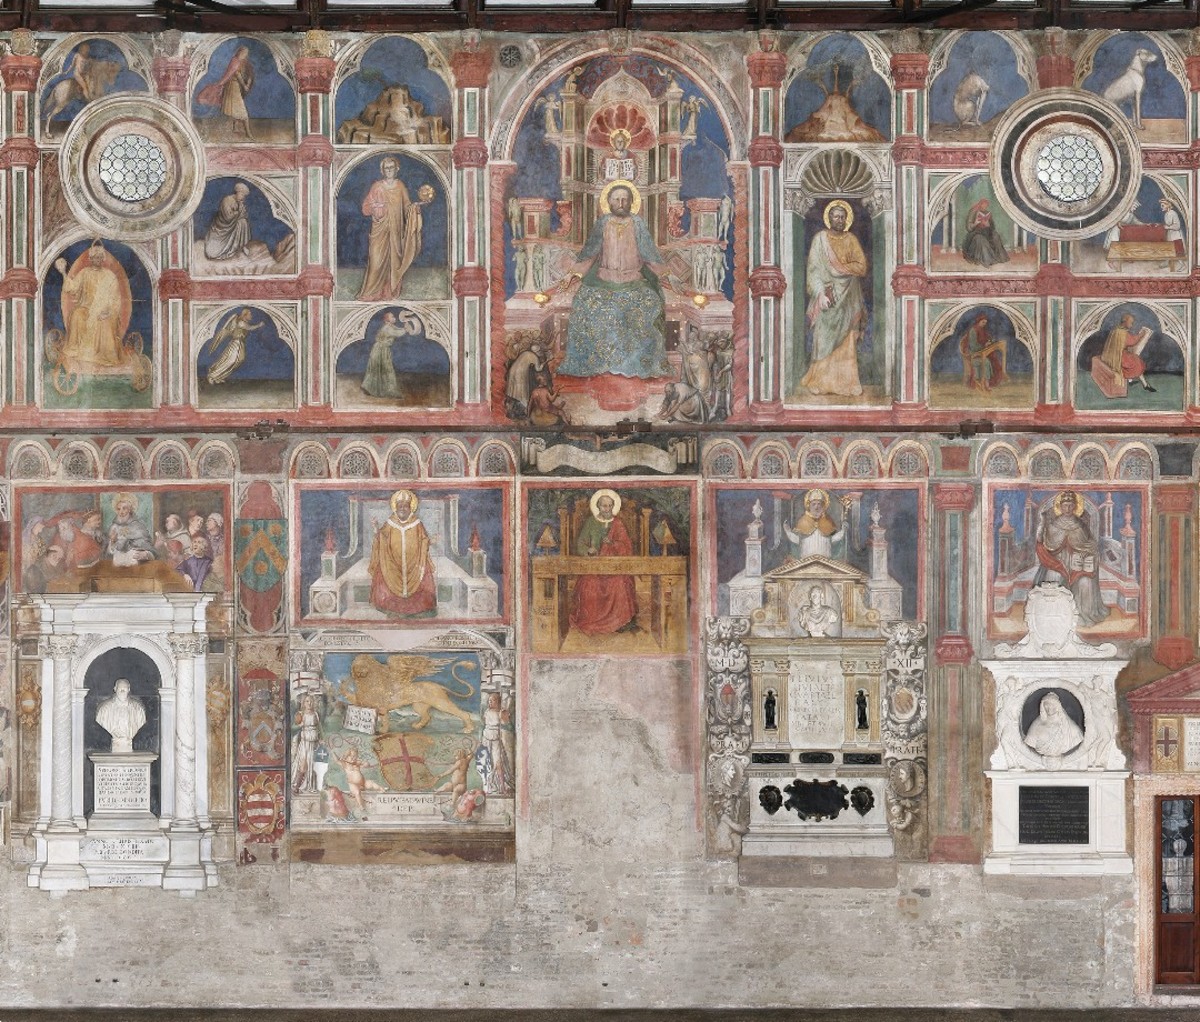 One of the frescoes painted in Padua, Italy during the 14th century.